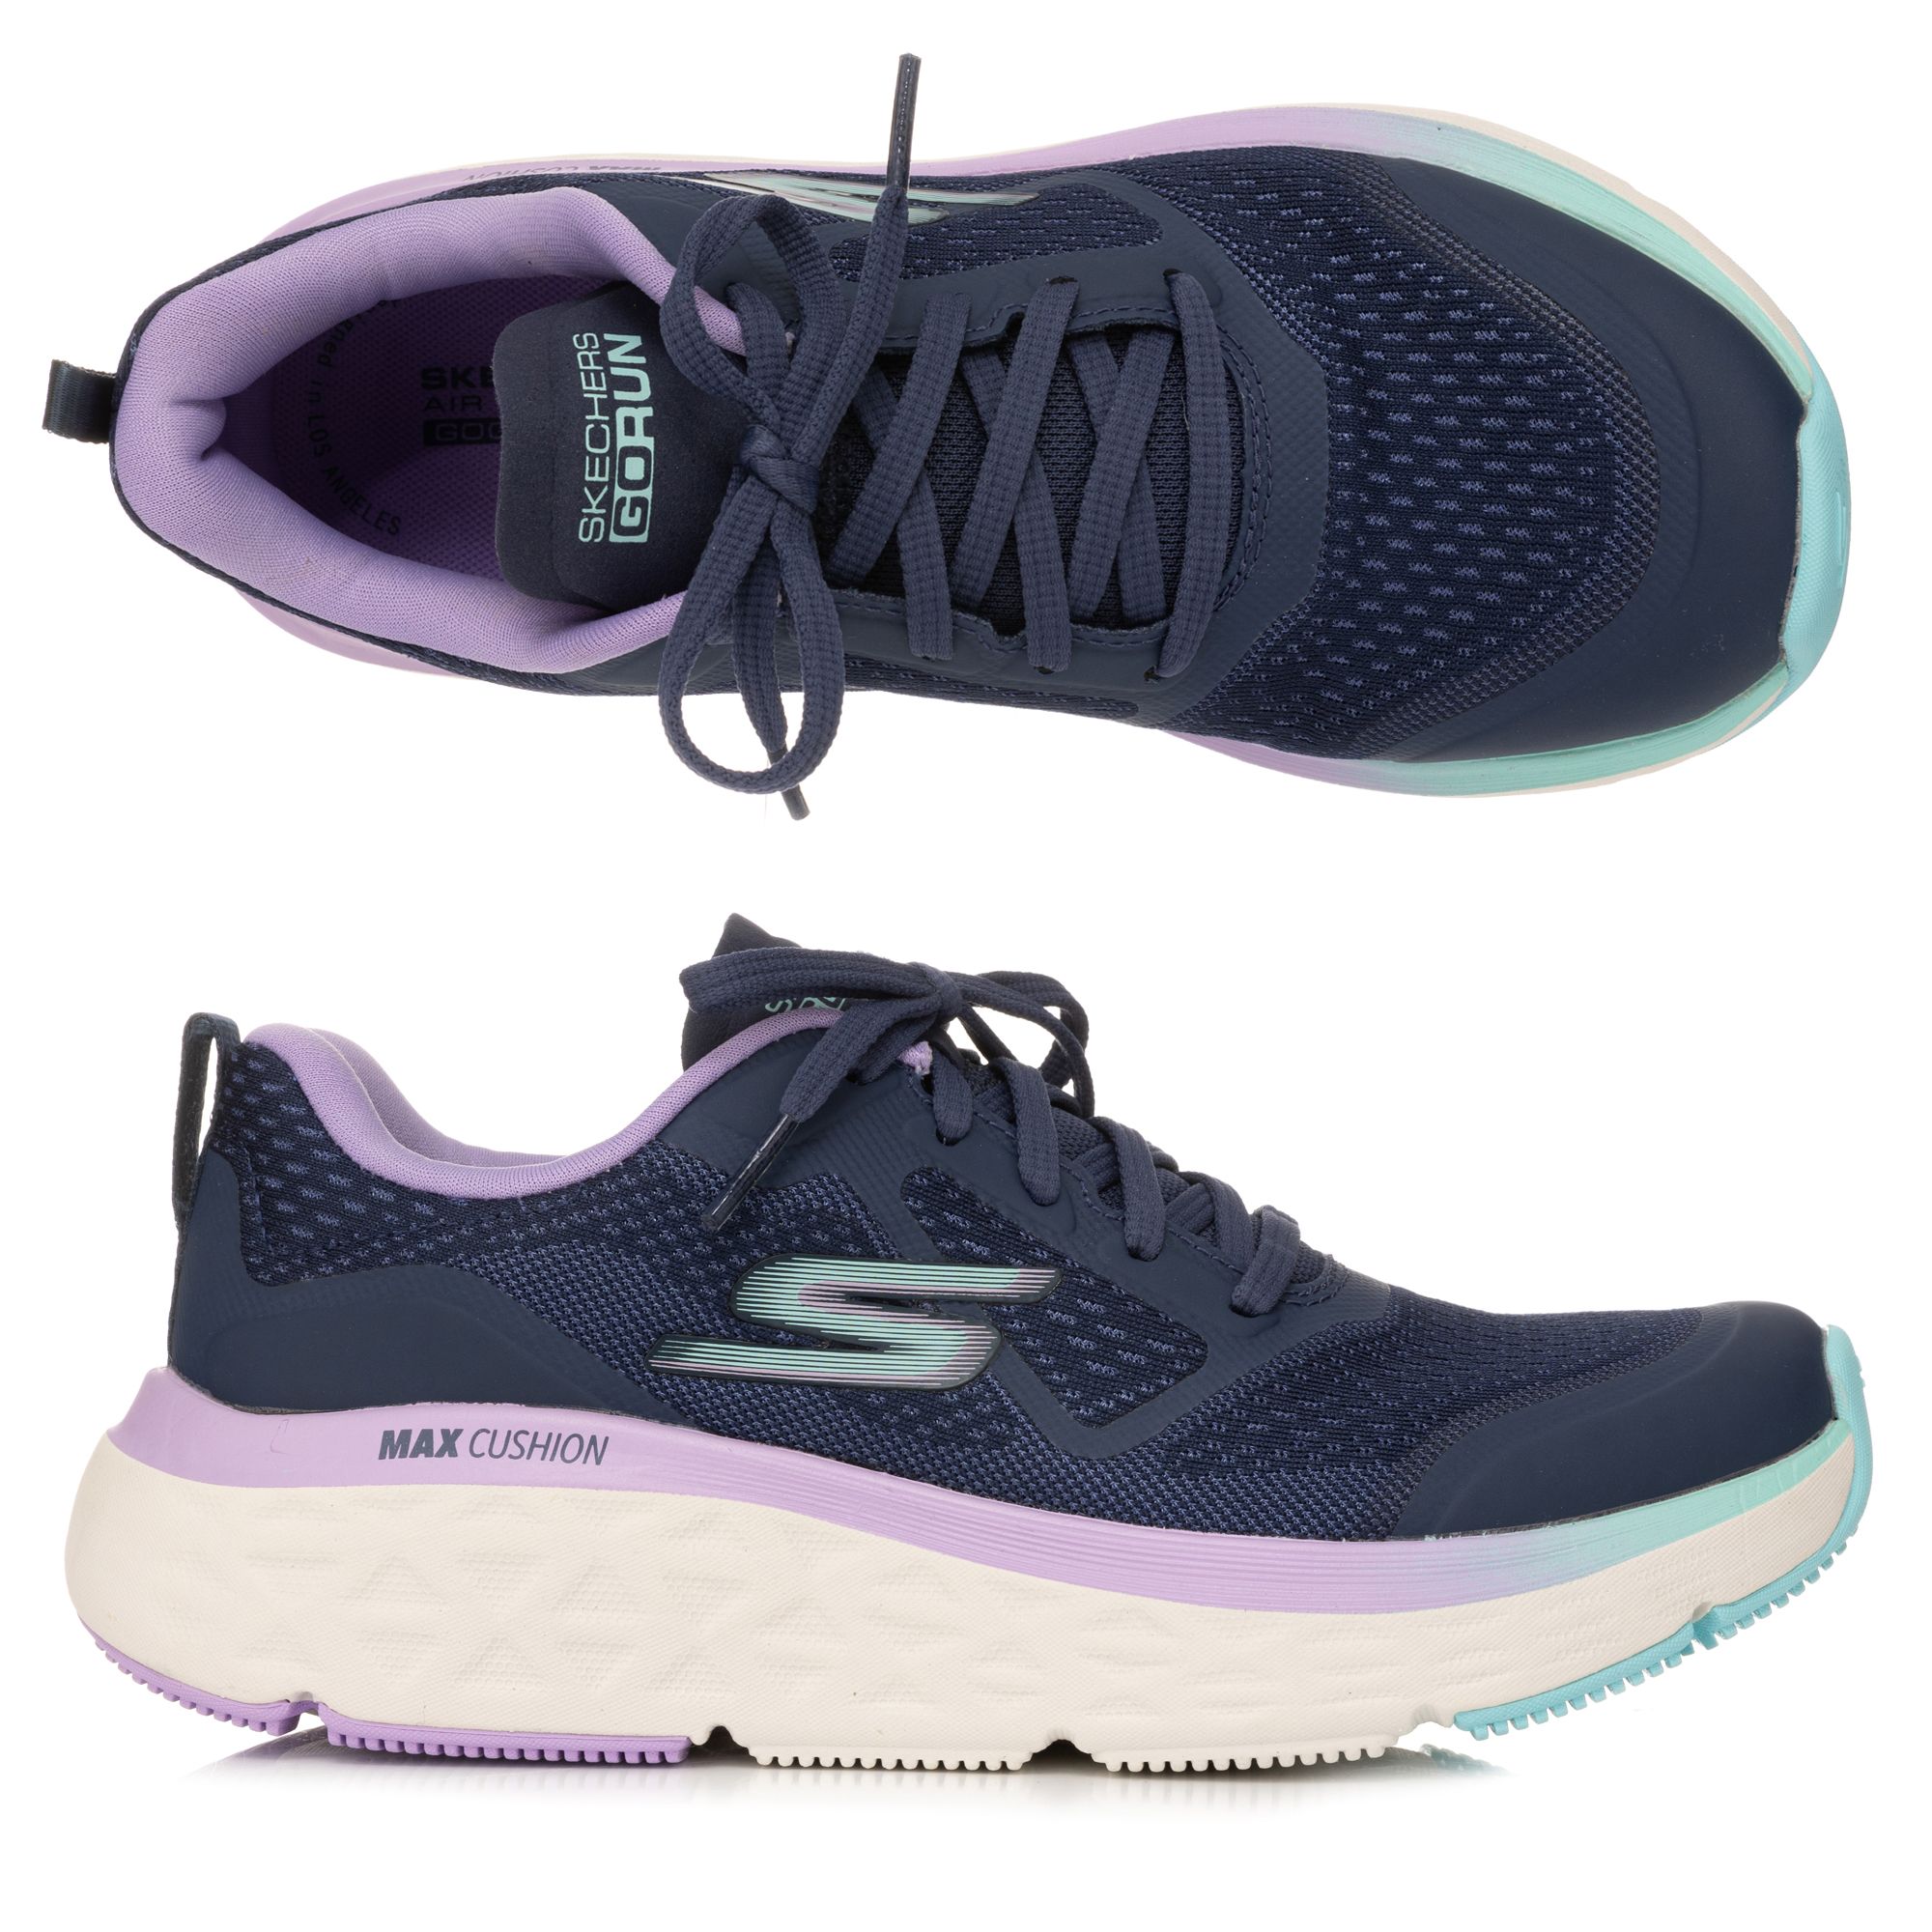 magneet overal charme SKECHERS Damen-Sneaker Max Cushioning Delta Materialmix Goodyear®  Außensohle - QVC.de